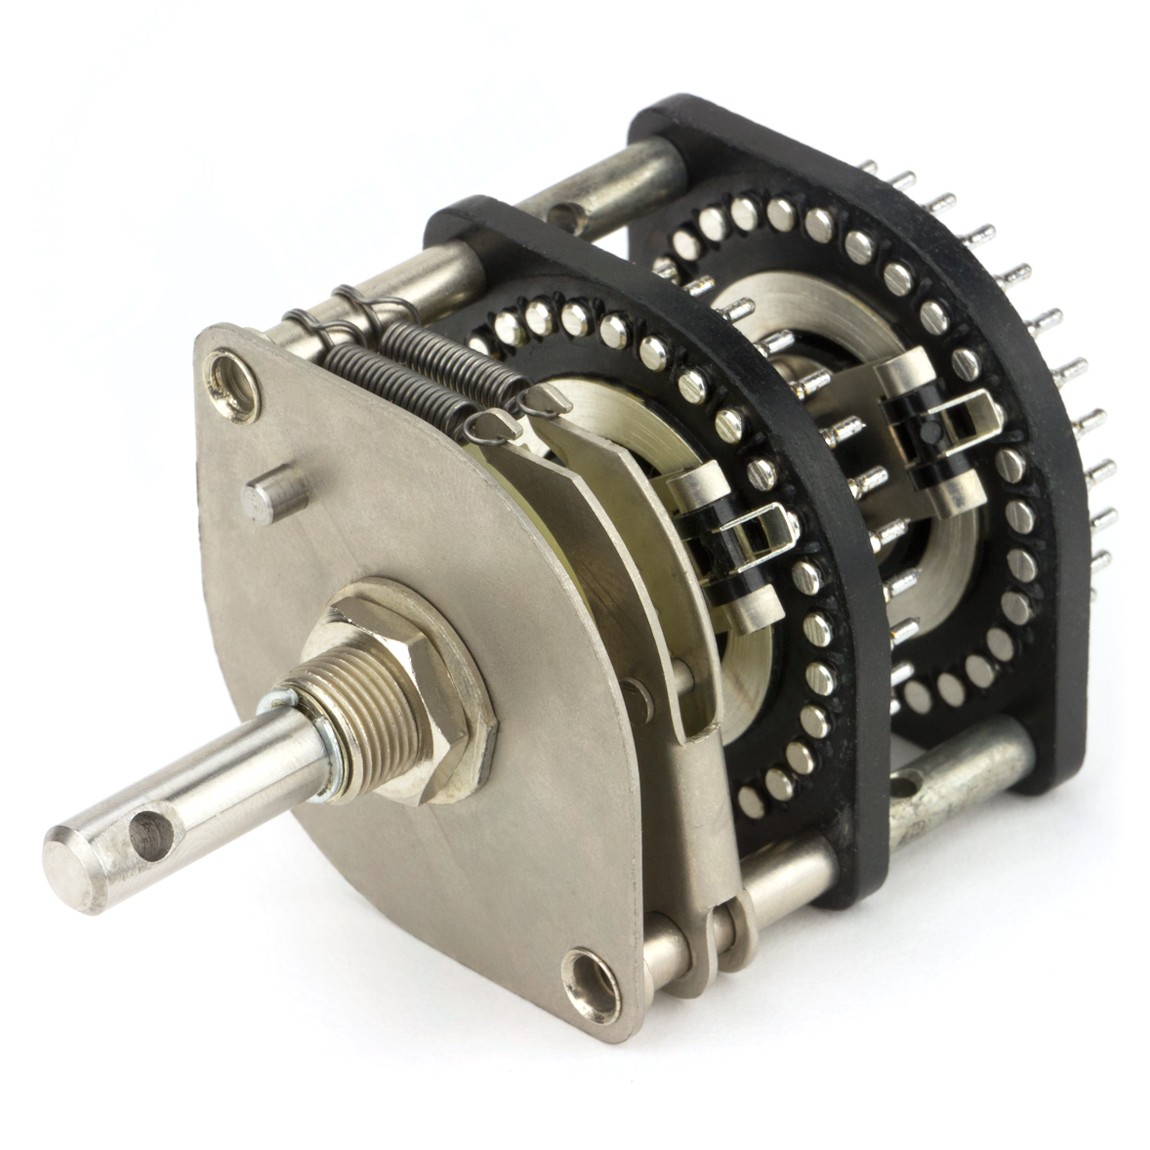 Rotary Switch Market Report, 2019-2024